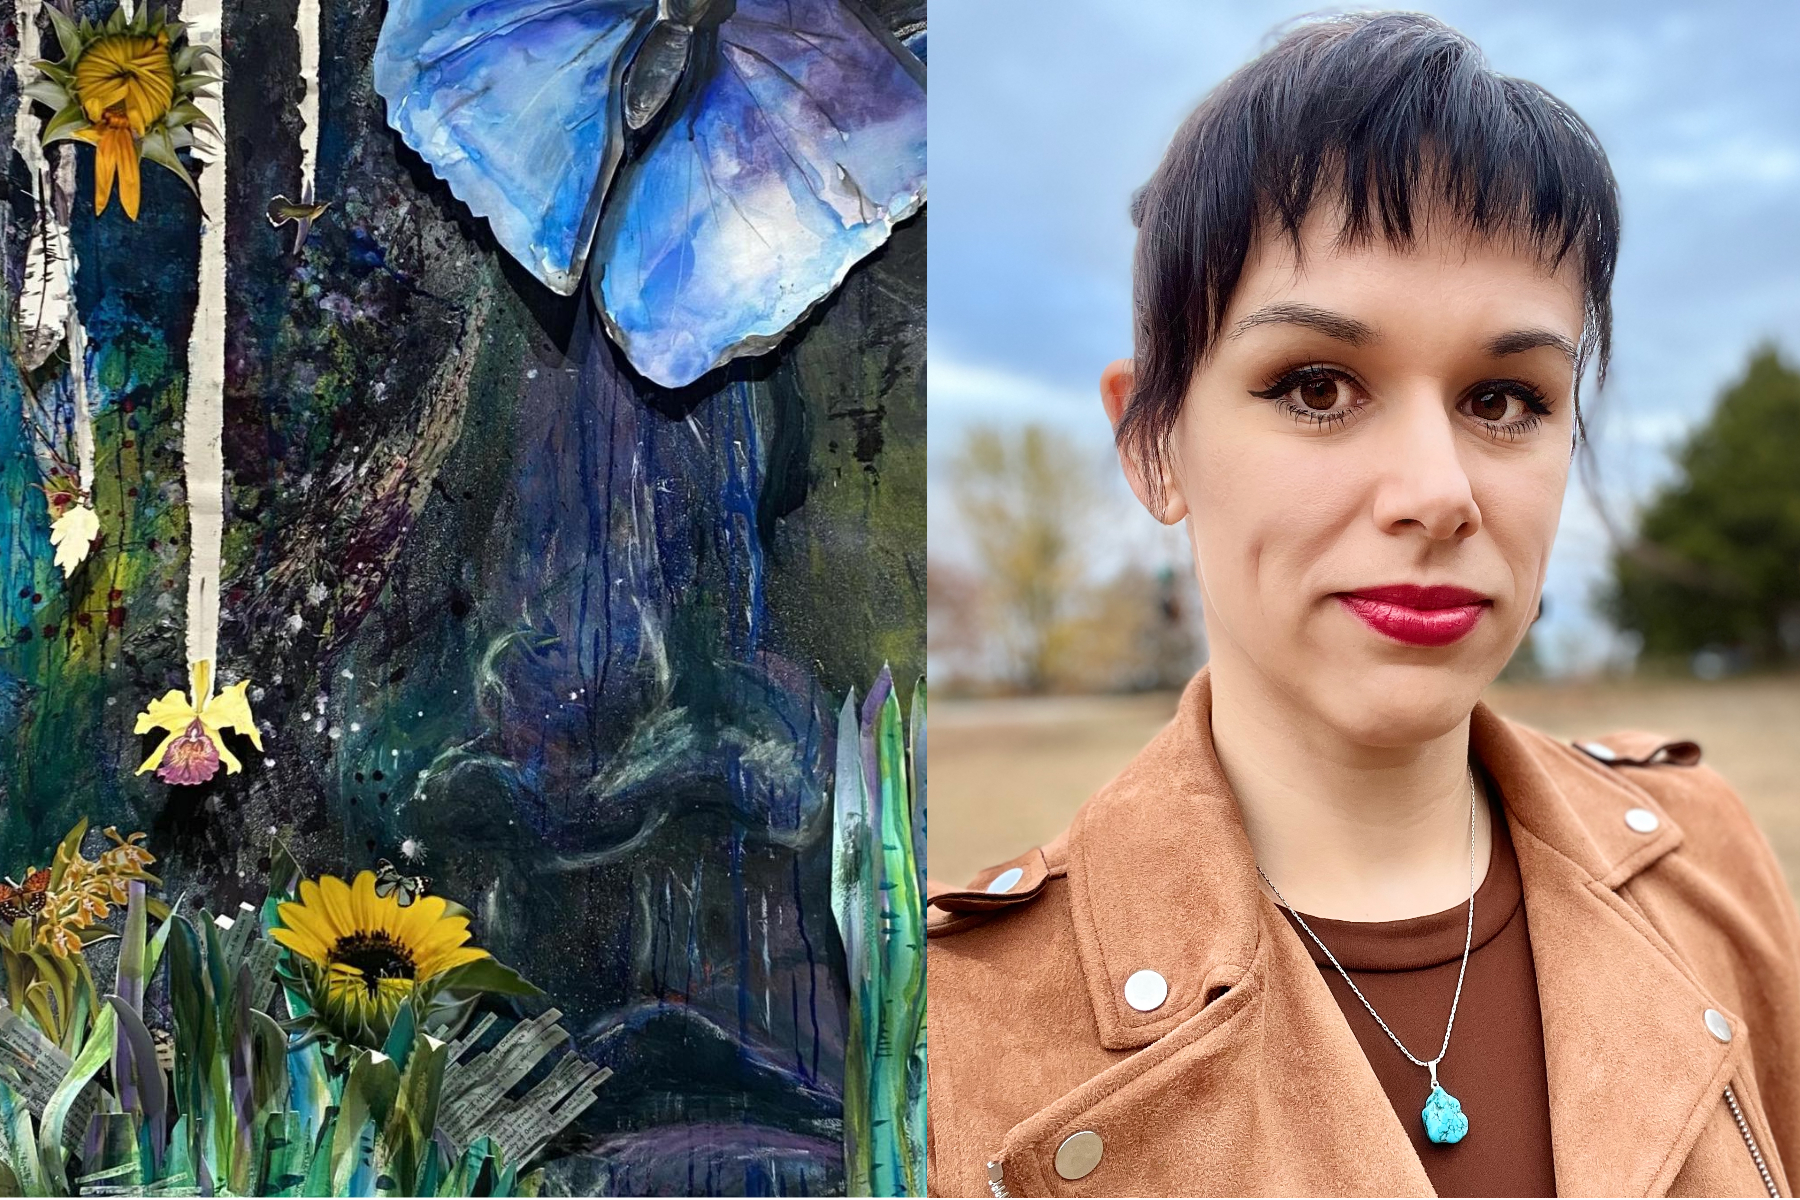 At left, art by Lori Santos, Mother Tongue (detail), 2022; mixed media, paper, watercolors, colored pencil, collage. Courtesy of the artist. On the right is a photo of Tatiana Larsen